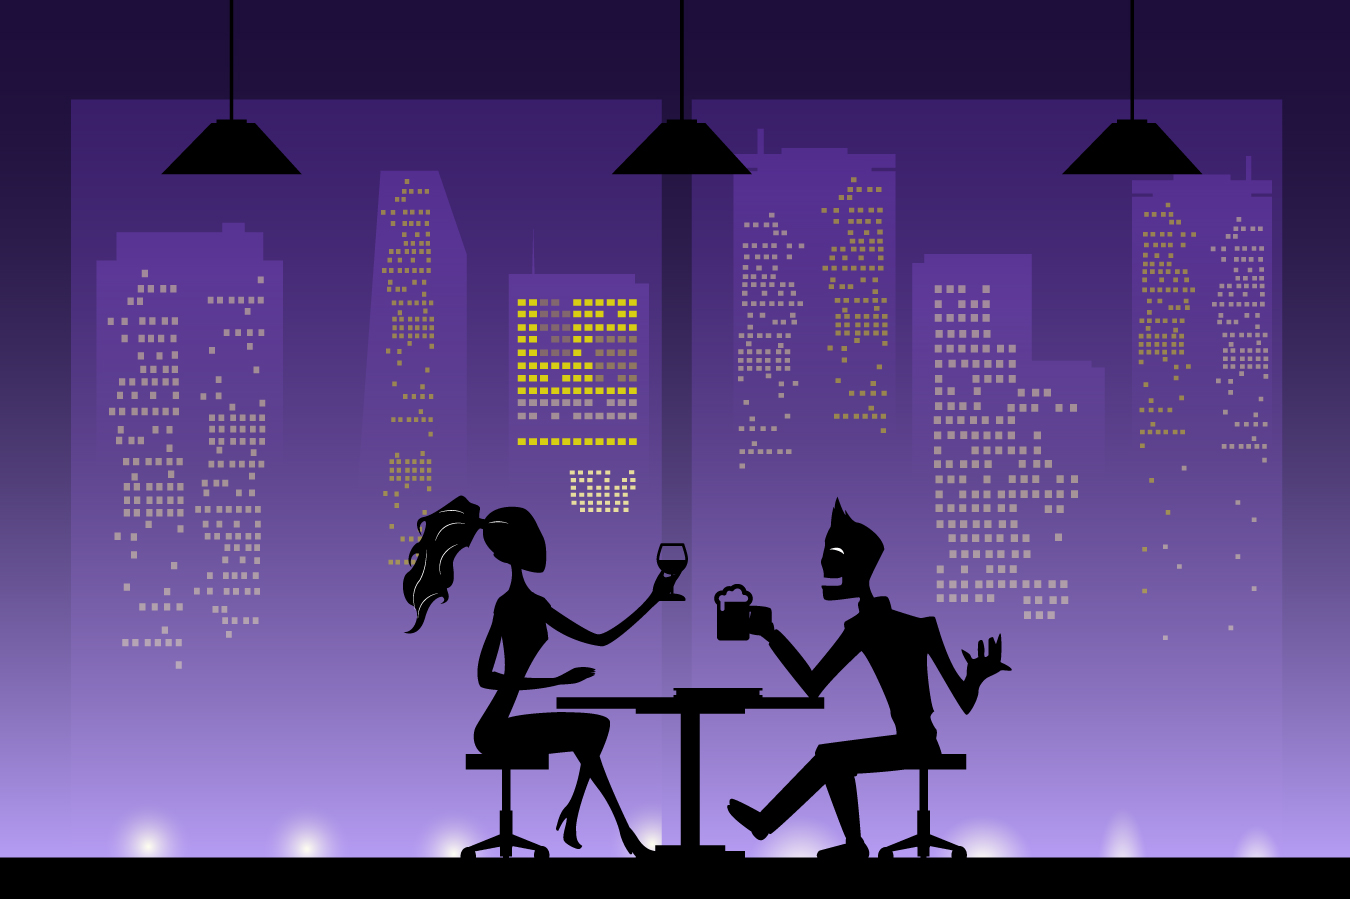 Blacked out silhouettes of man holding a glass of beer and woman holding a wine glass sitting on a bar table talking.